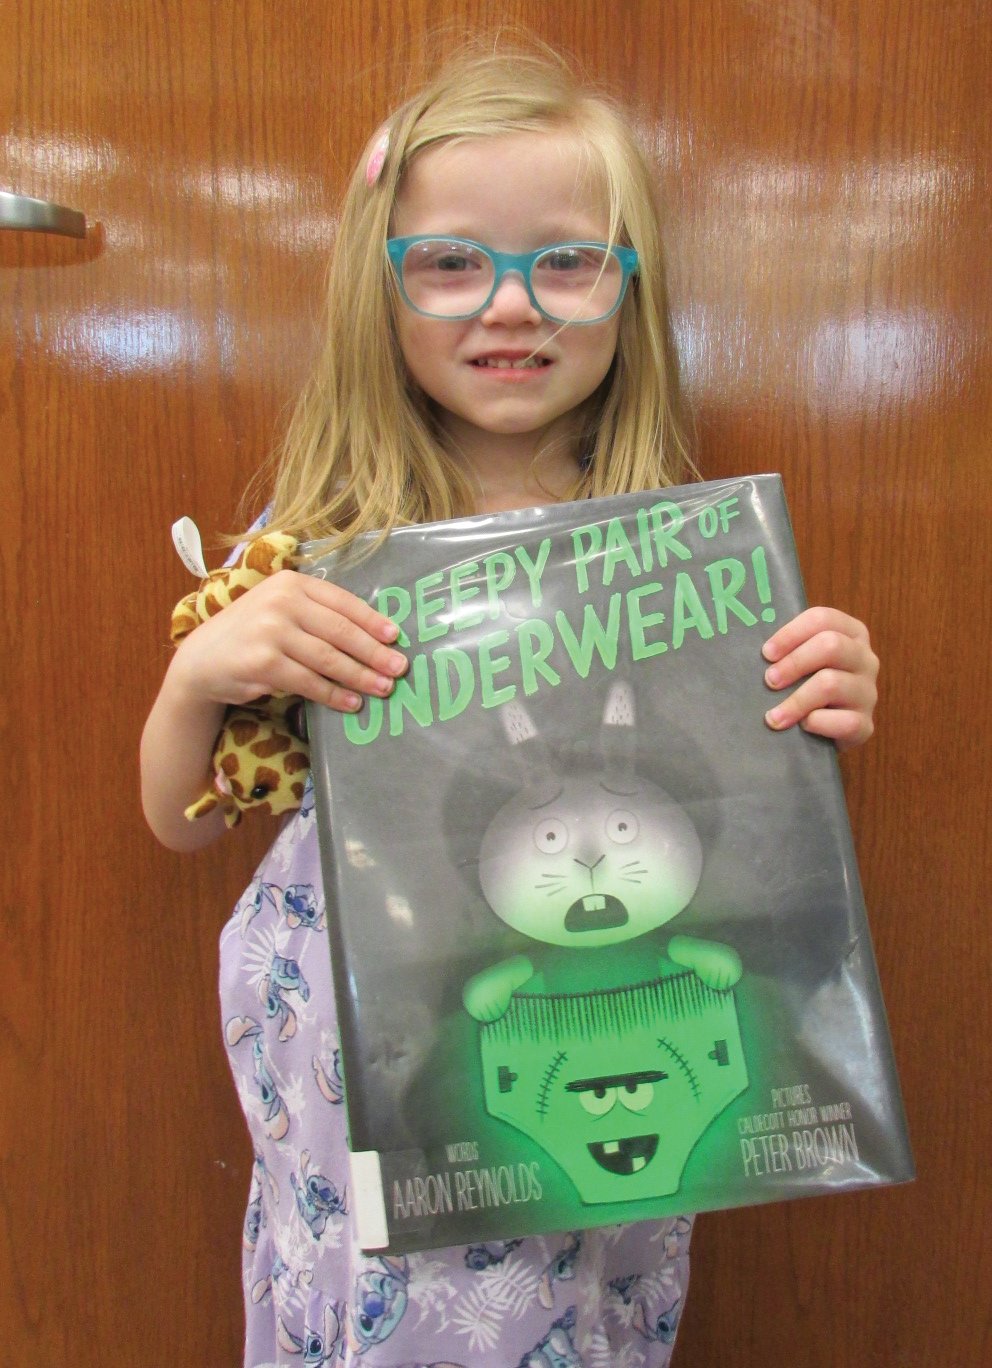 Nova Meuchel,  4, has completed the Crawfordsville District Public Library program, 1.000 Books Before Kindergarten. She is the daughter of Ryan and Kendra Meuchel. Nova's favorite book is "Creepy Pair of Underwear!" by Aaron Ryenolds. Mom said, "We love and appreciate everything the library and the staff does for our family. We love all of the programs, story times, Wiggle and Giggle and the countless activities they put on."